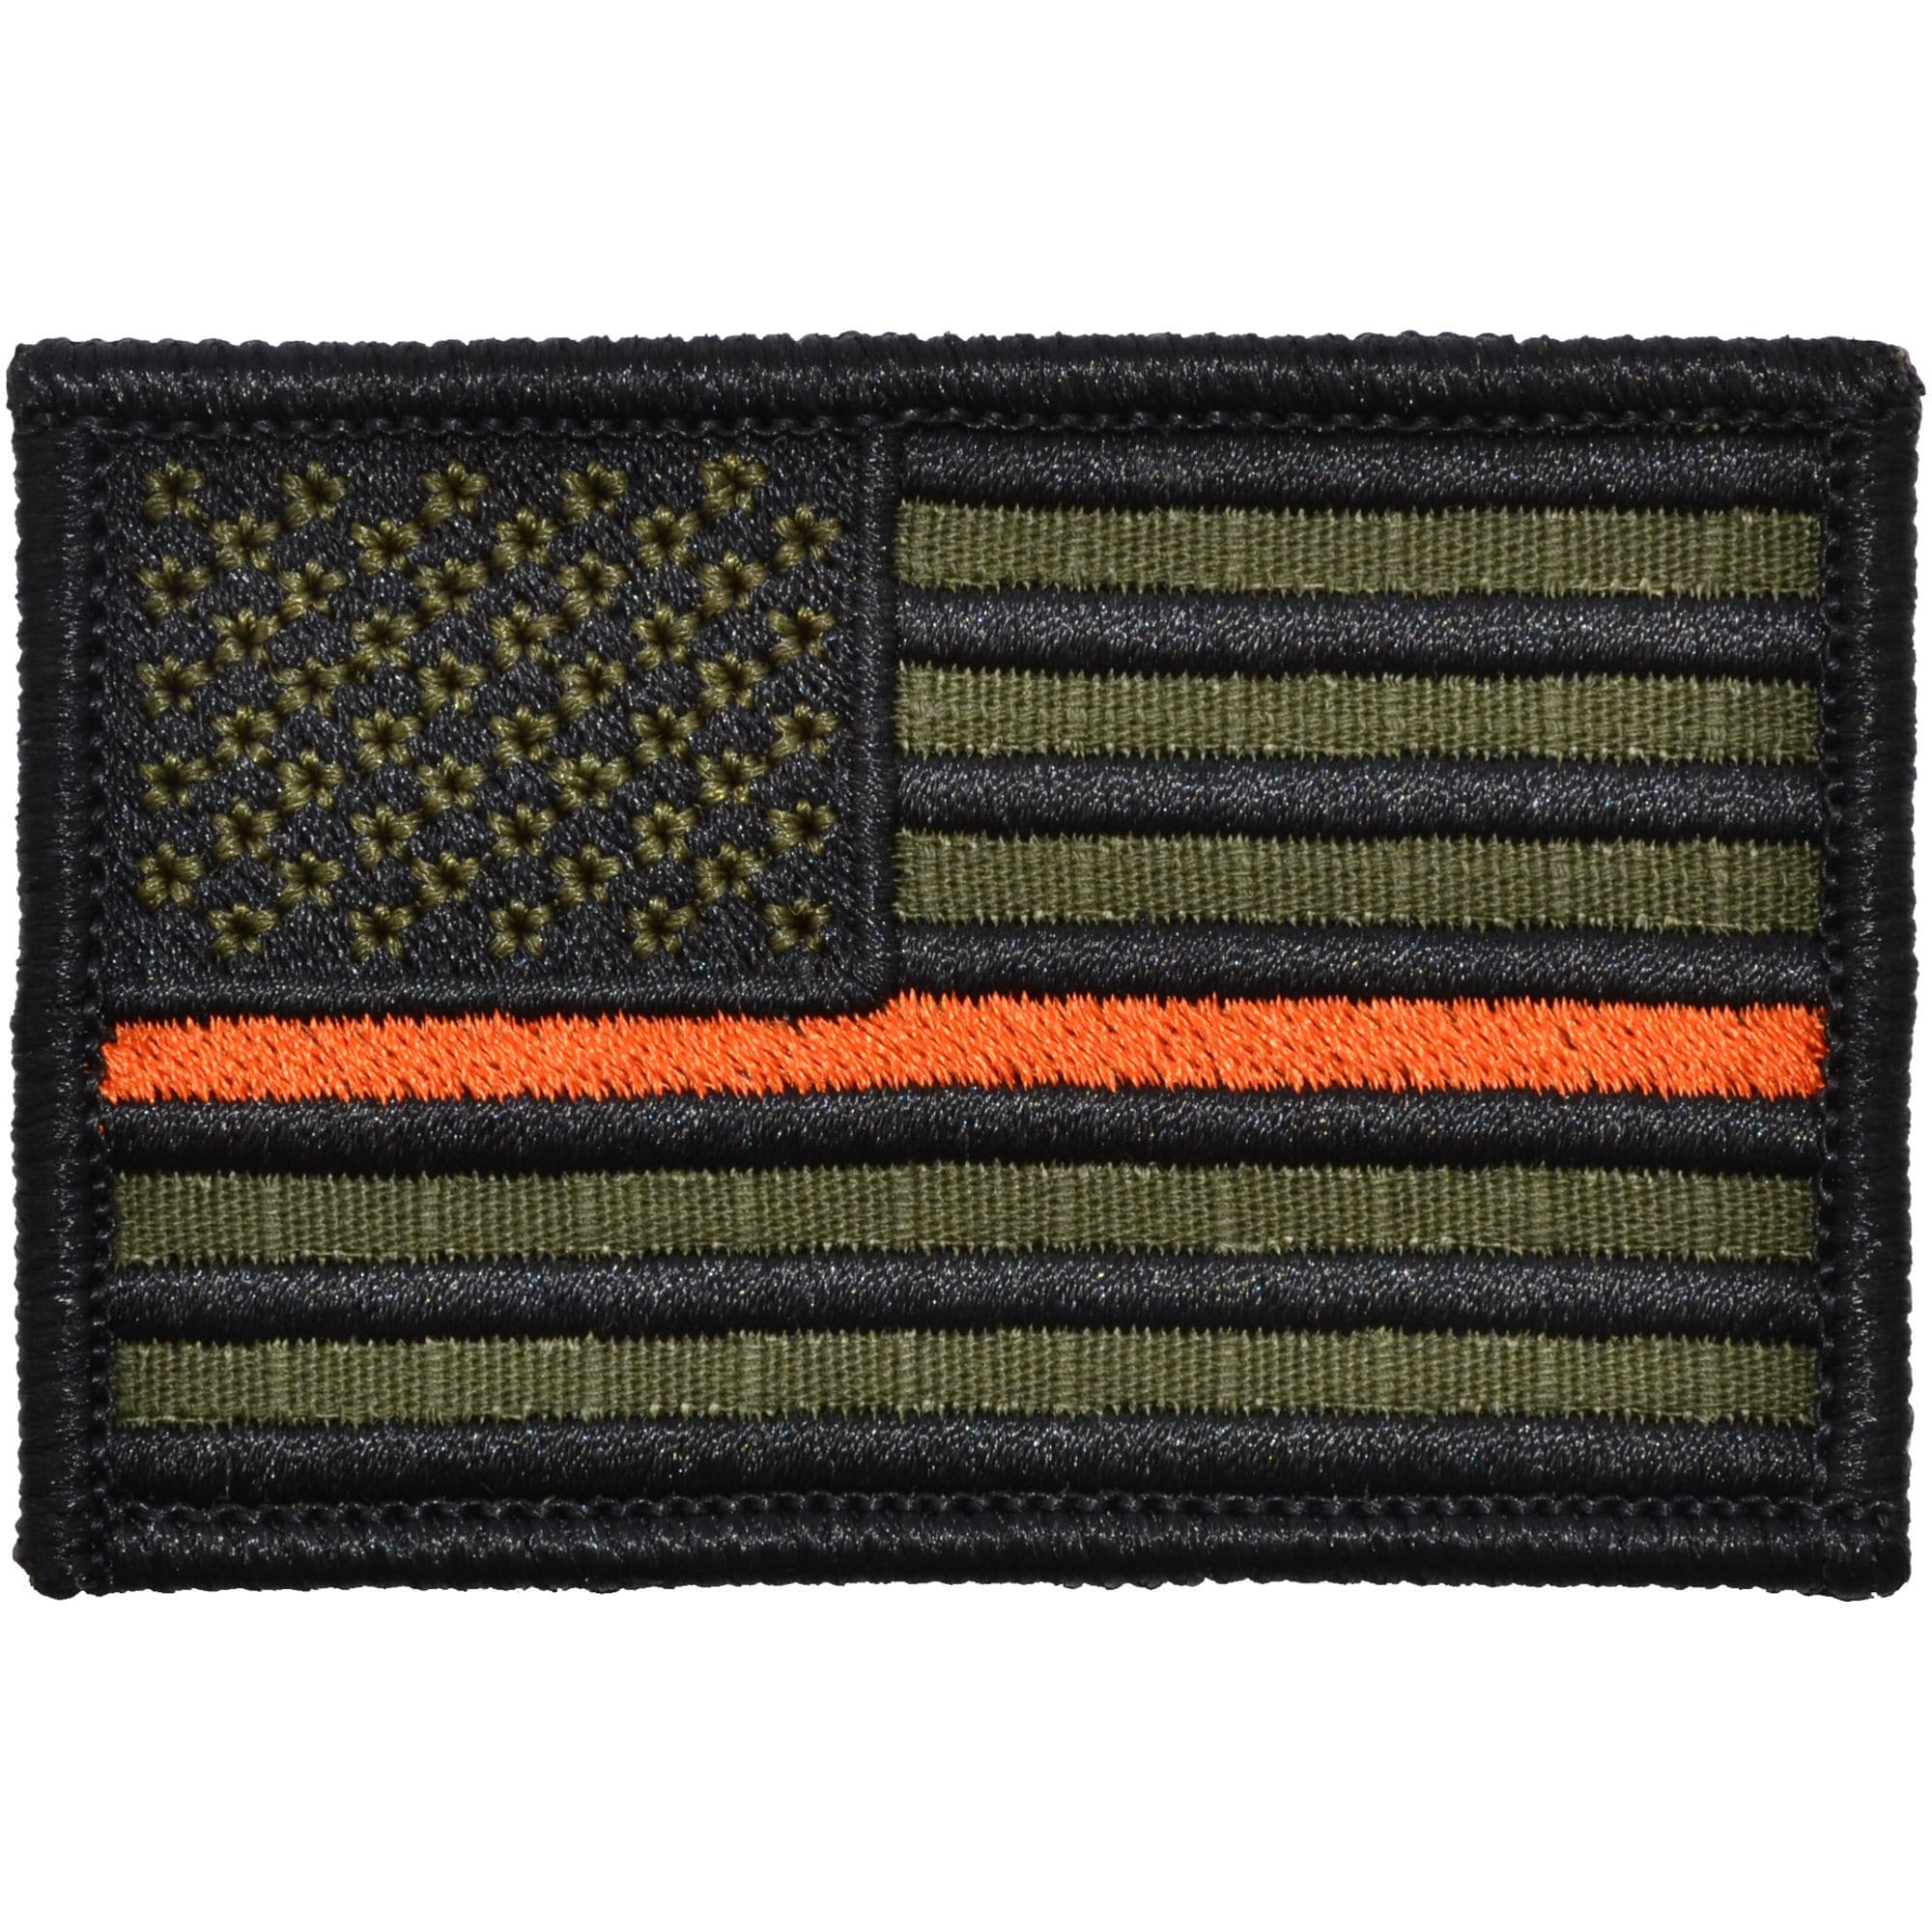 Tactical Gear Junkie Patches Olive Drab Thin Orange Line Search & Rescue USA Flag - 2x3 Patch